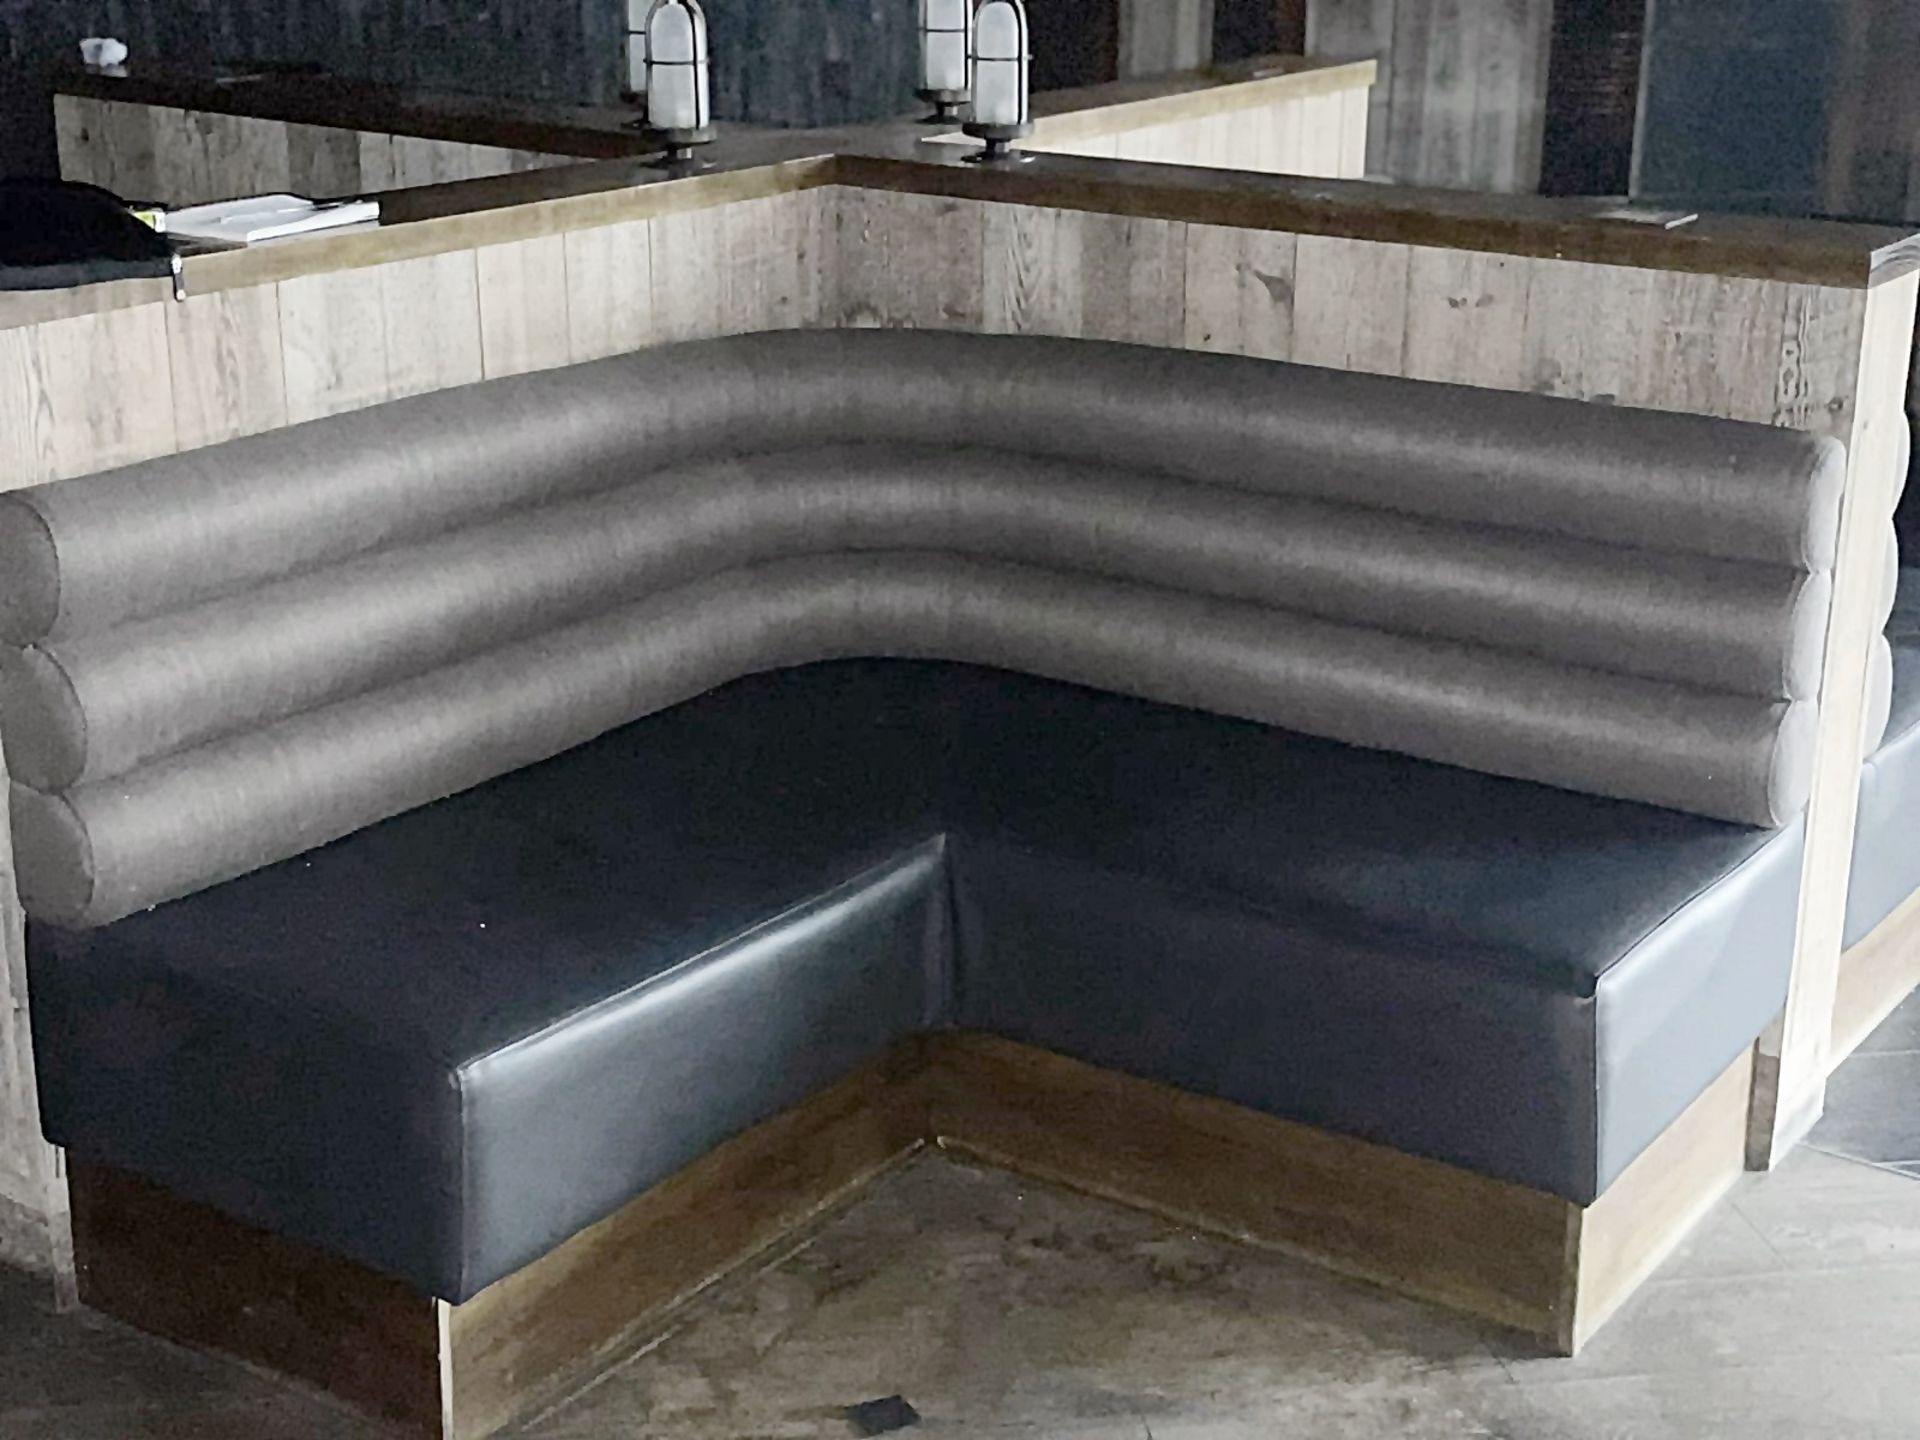 4 x Corner Seating Benches Upholstered in Two Tone Grey Leather and Fabric - Dimensions: 245 x 130